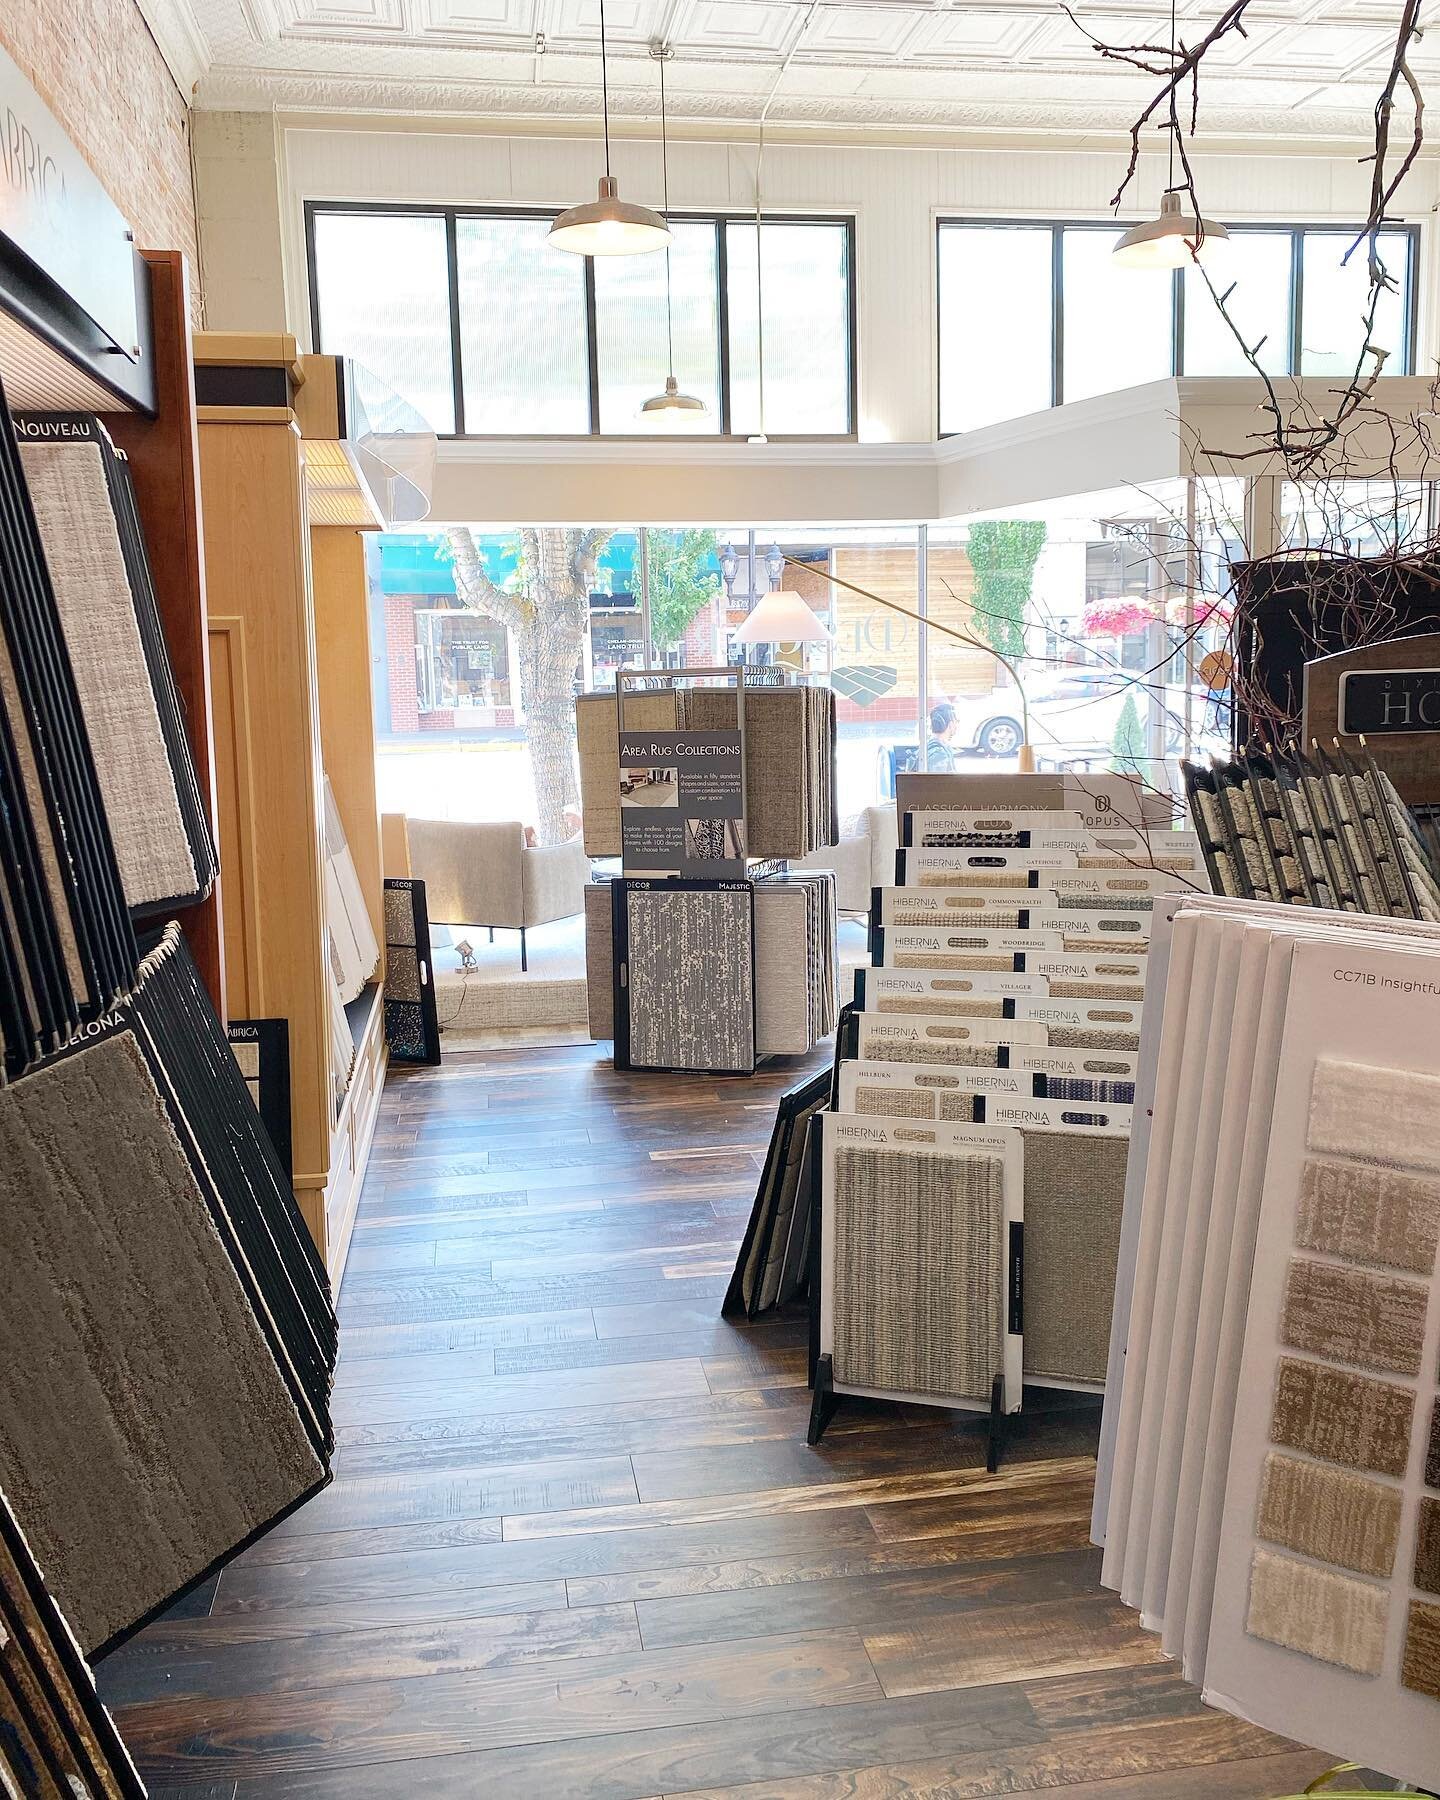 Our carpet selection is user-friendly and hand-picked for just for YOU! 

We select only the BEST quality for our community and take the guess work out of the floor covering process. Let us help guide you toward your DREAM space!!! ✨✨✨

#design
#supp